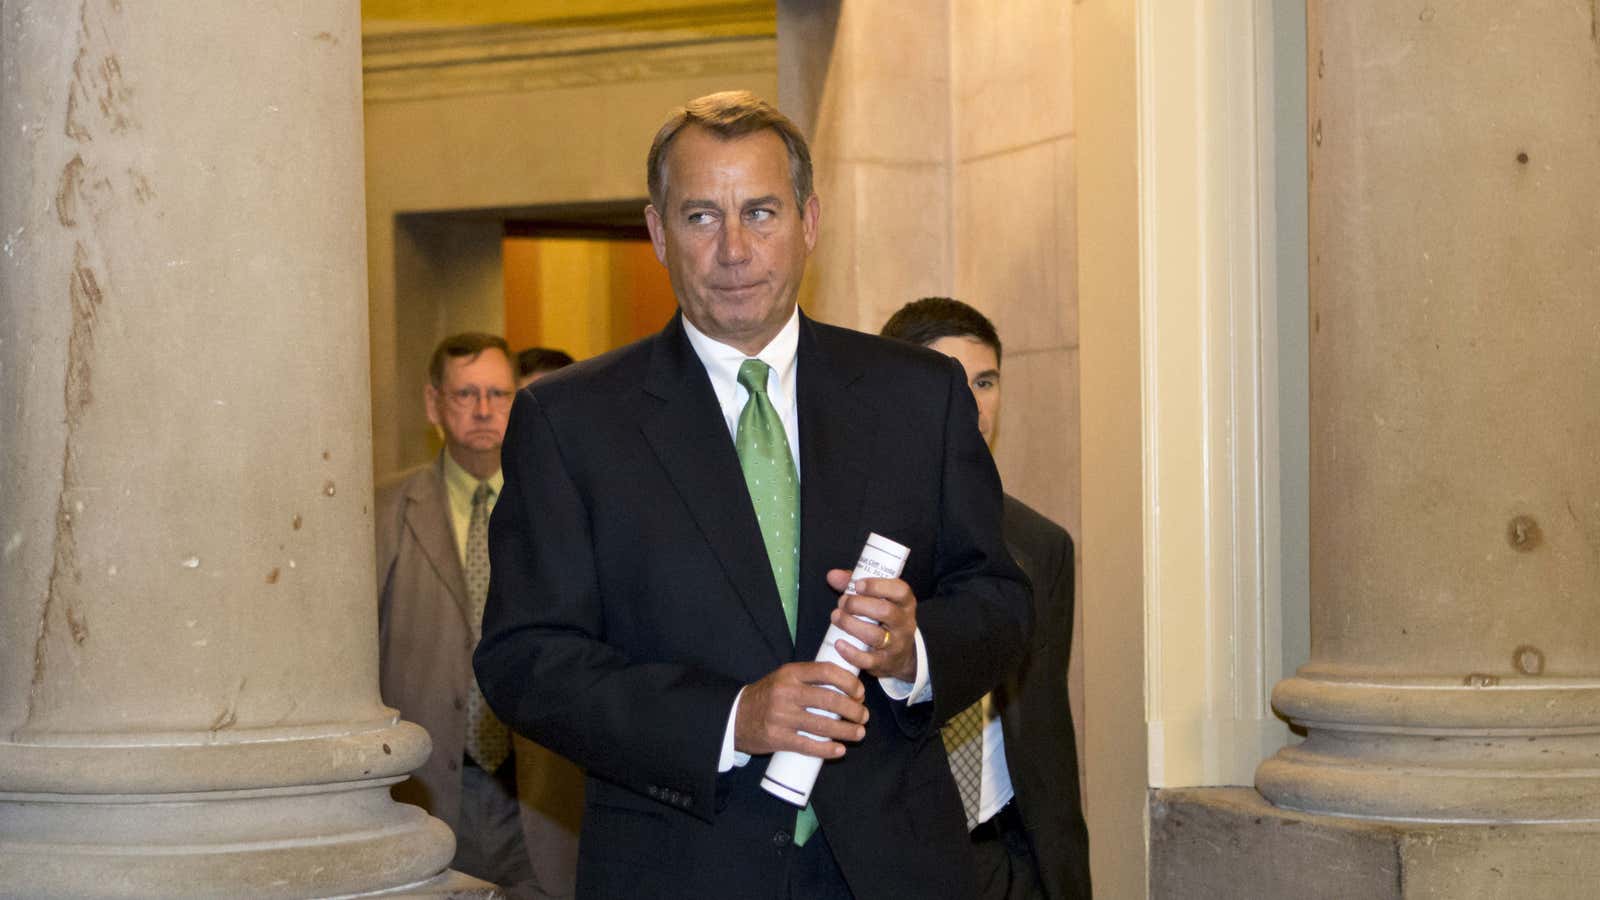 Can Boehner roll up a deal?